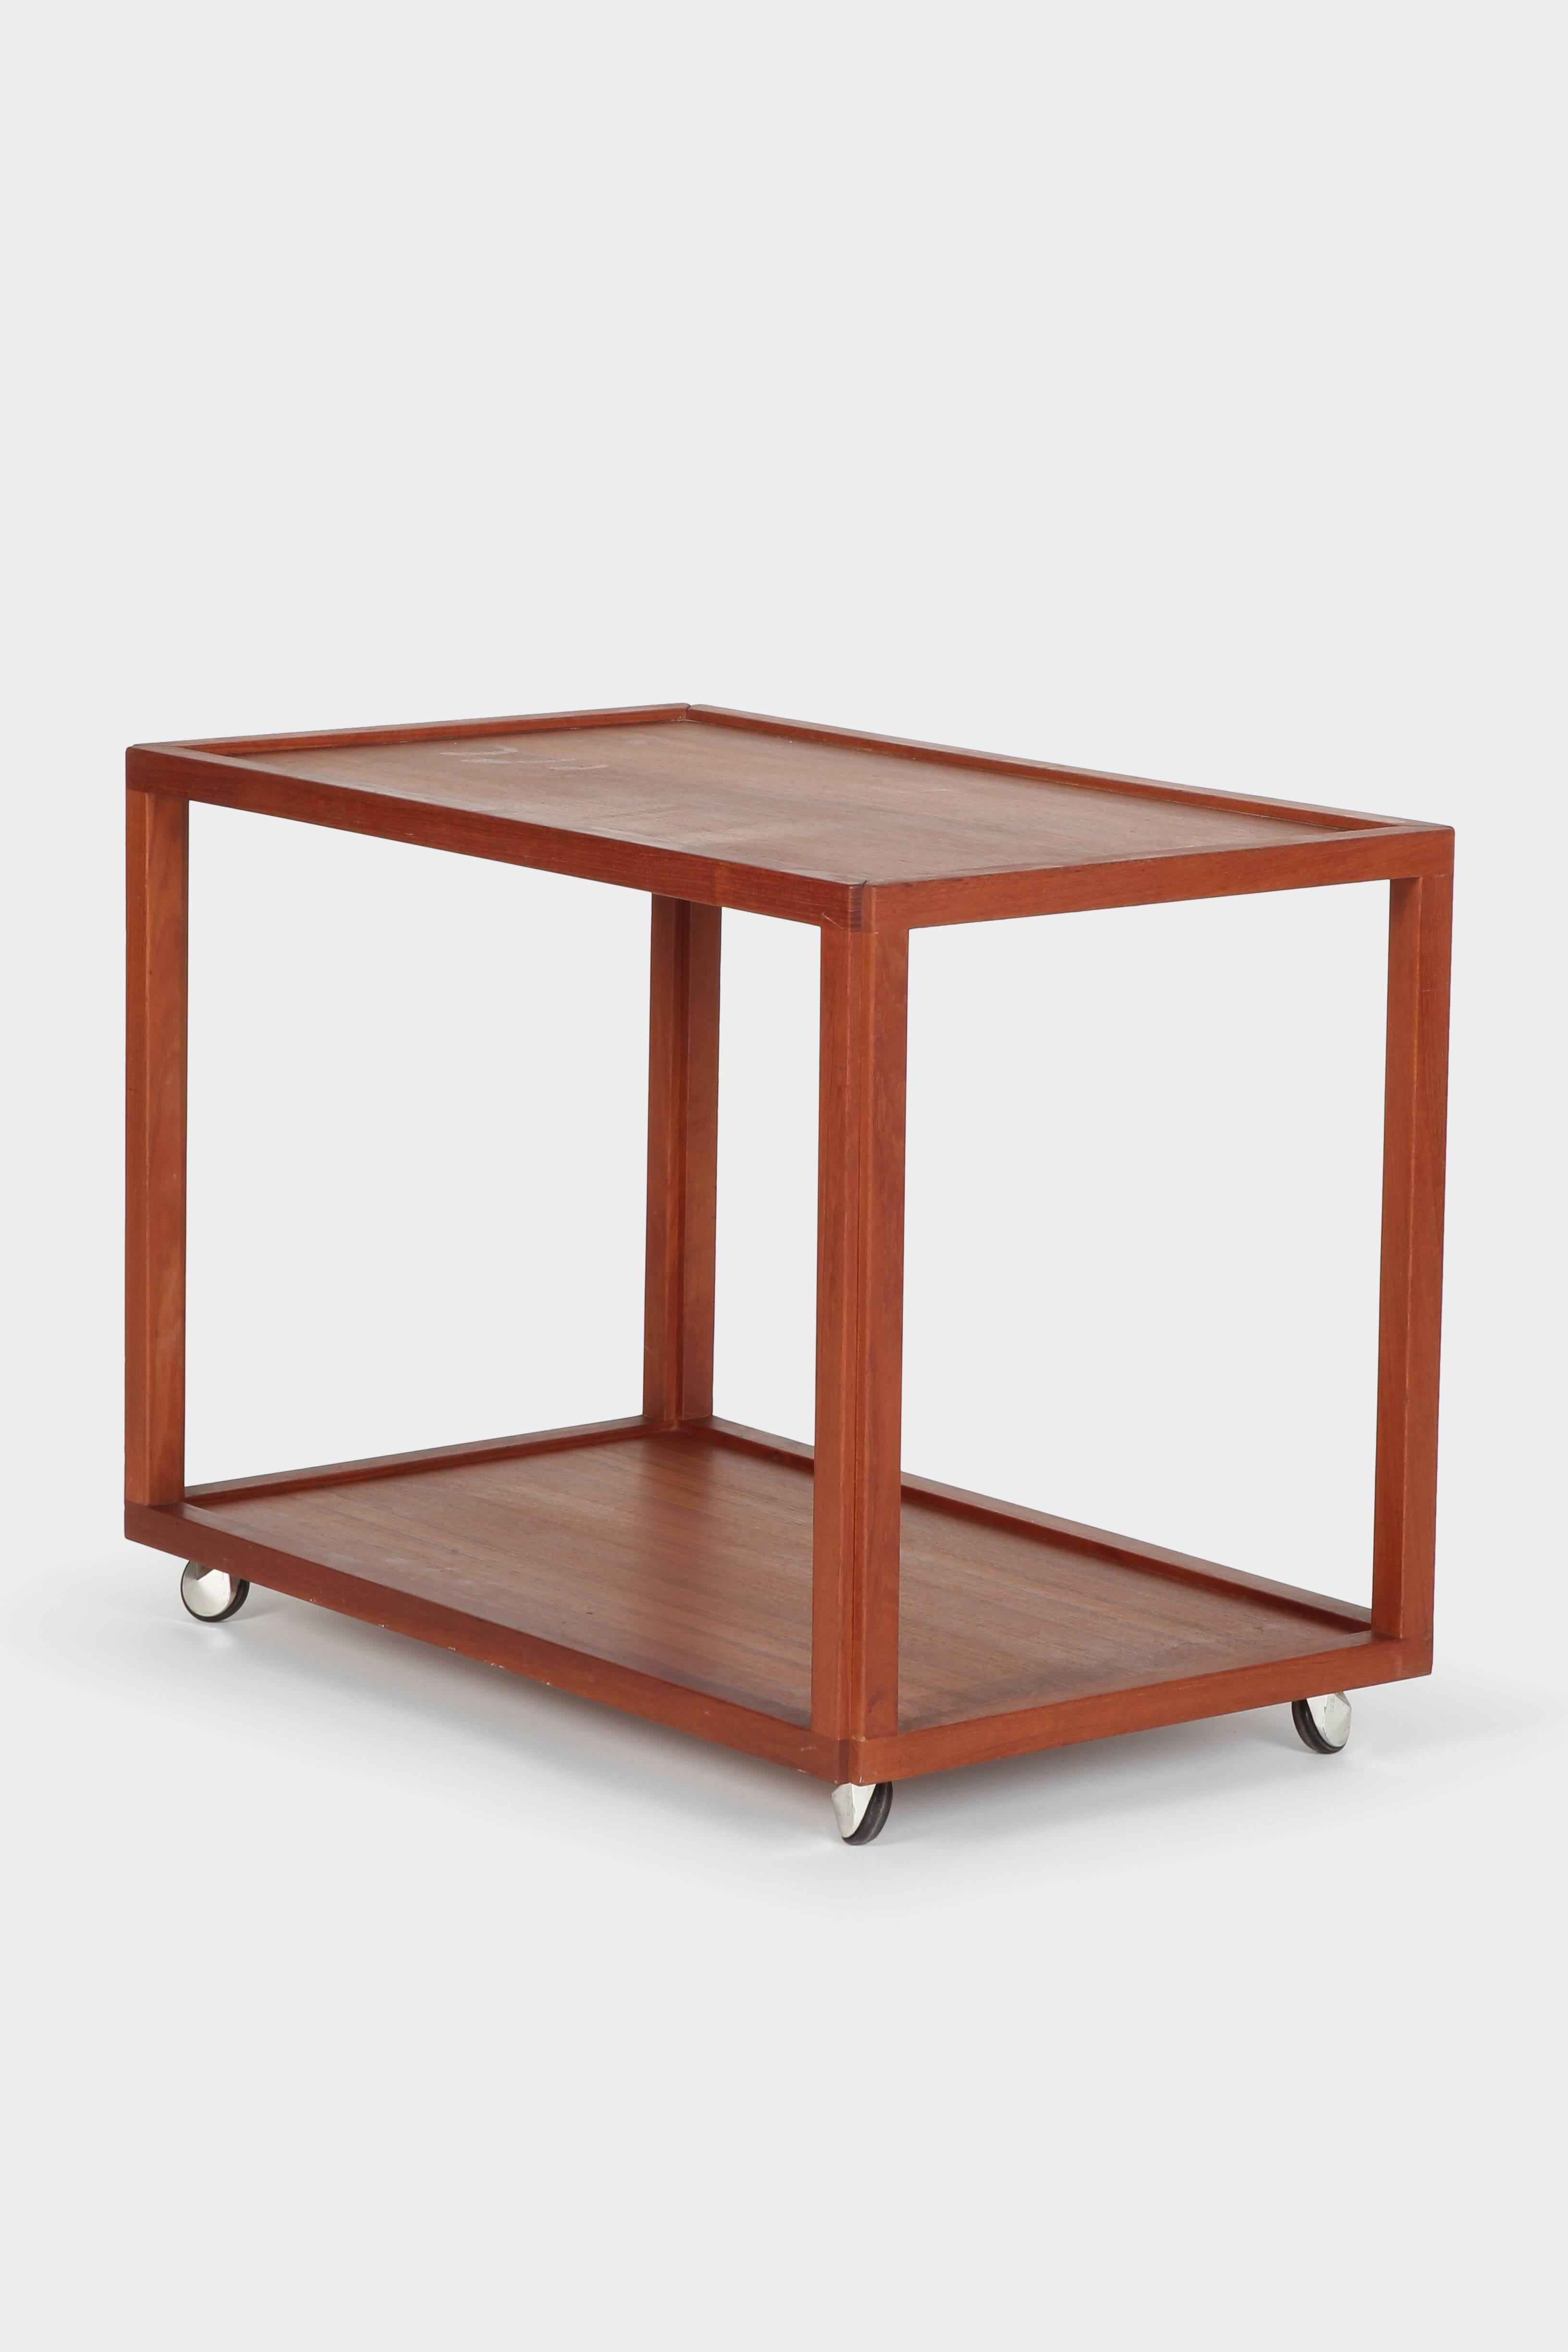 Attributed to Aksel Kjersgaard bar cart manufactured in the 1950s in Denmark. Solid and beautiful processed teak wood. Very modern and minimalist design.